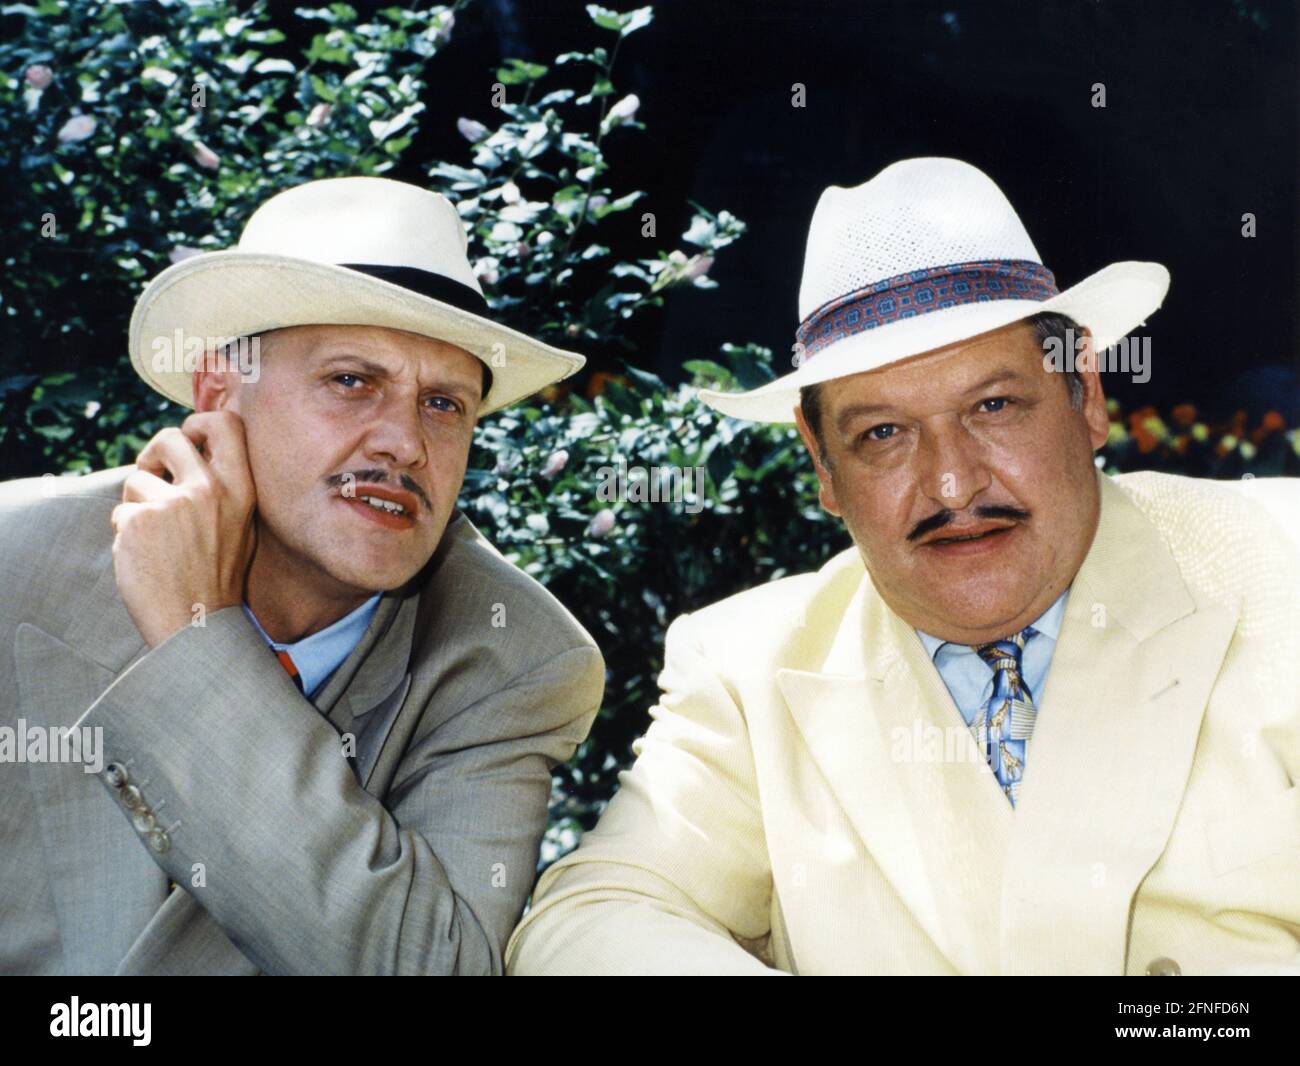 Actor Diether Krebs (r.) with Belgian comedian Carry Goossens (l.) in the sketch show 'Der Dicke und der Belgier'. [automated translation] Stock Photo